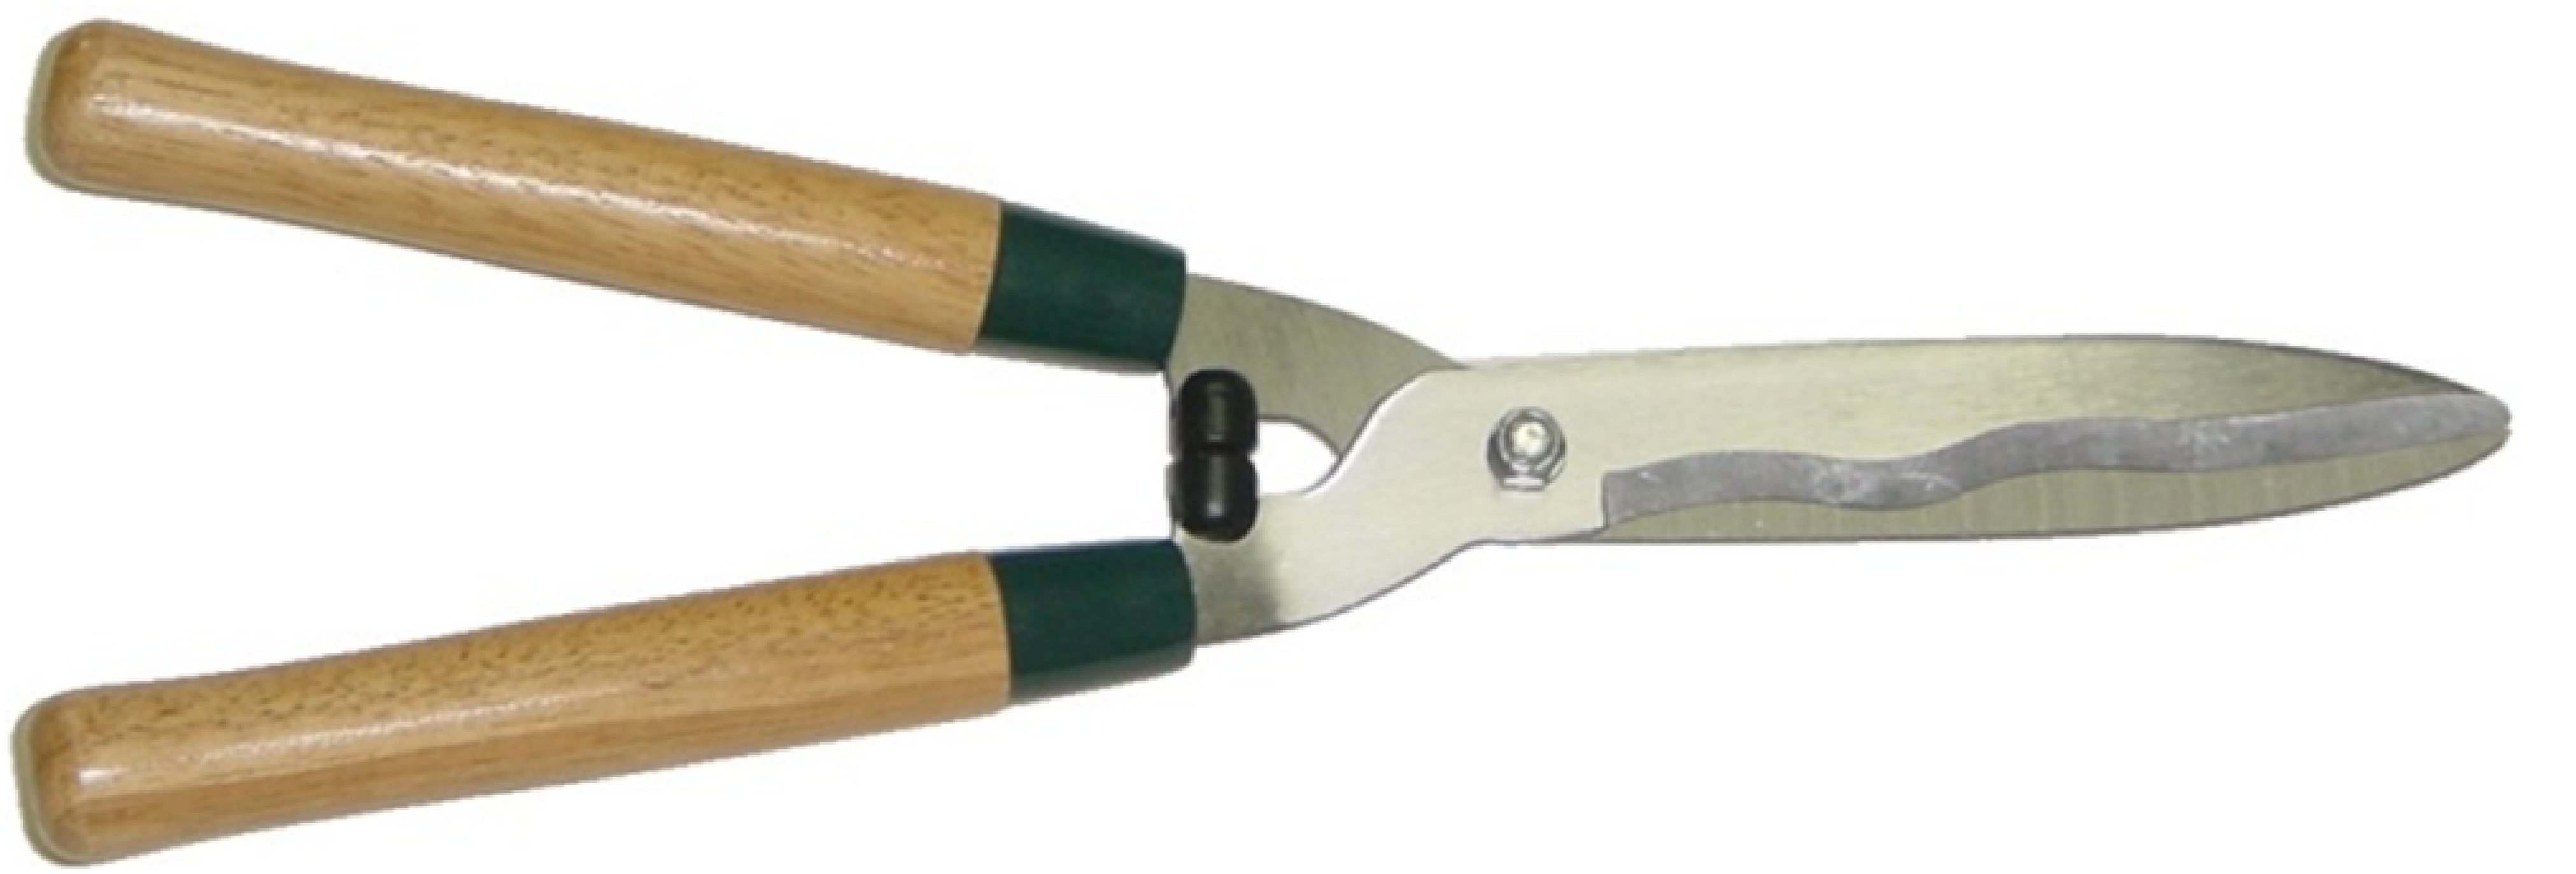 20” Promotion Hedge Shears